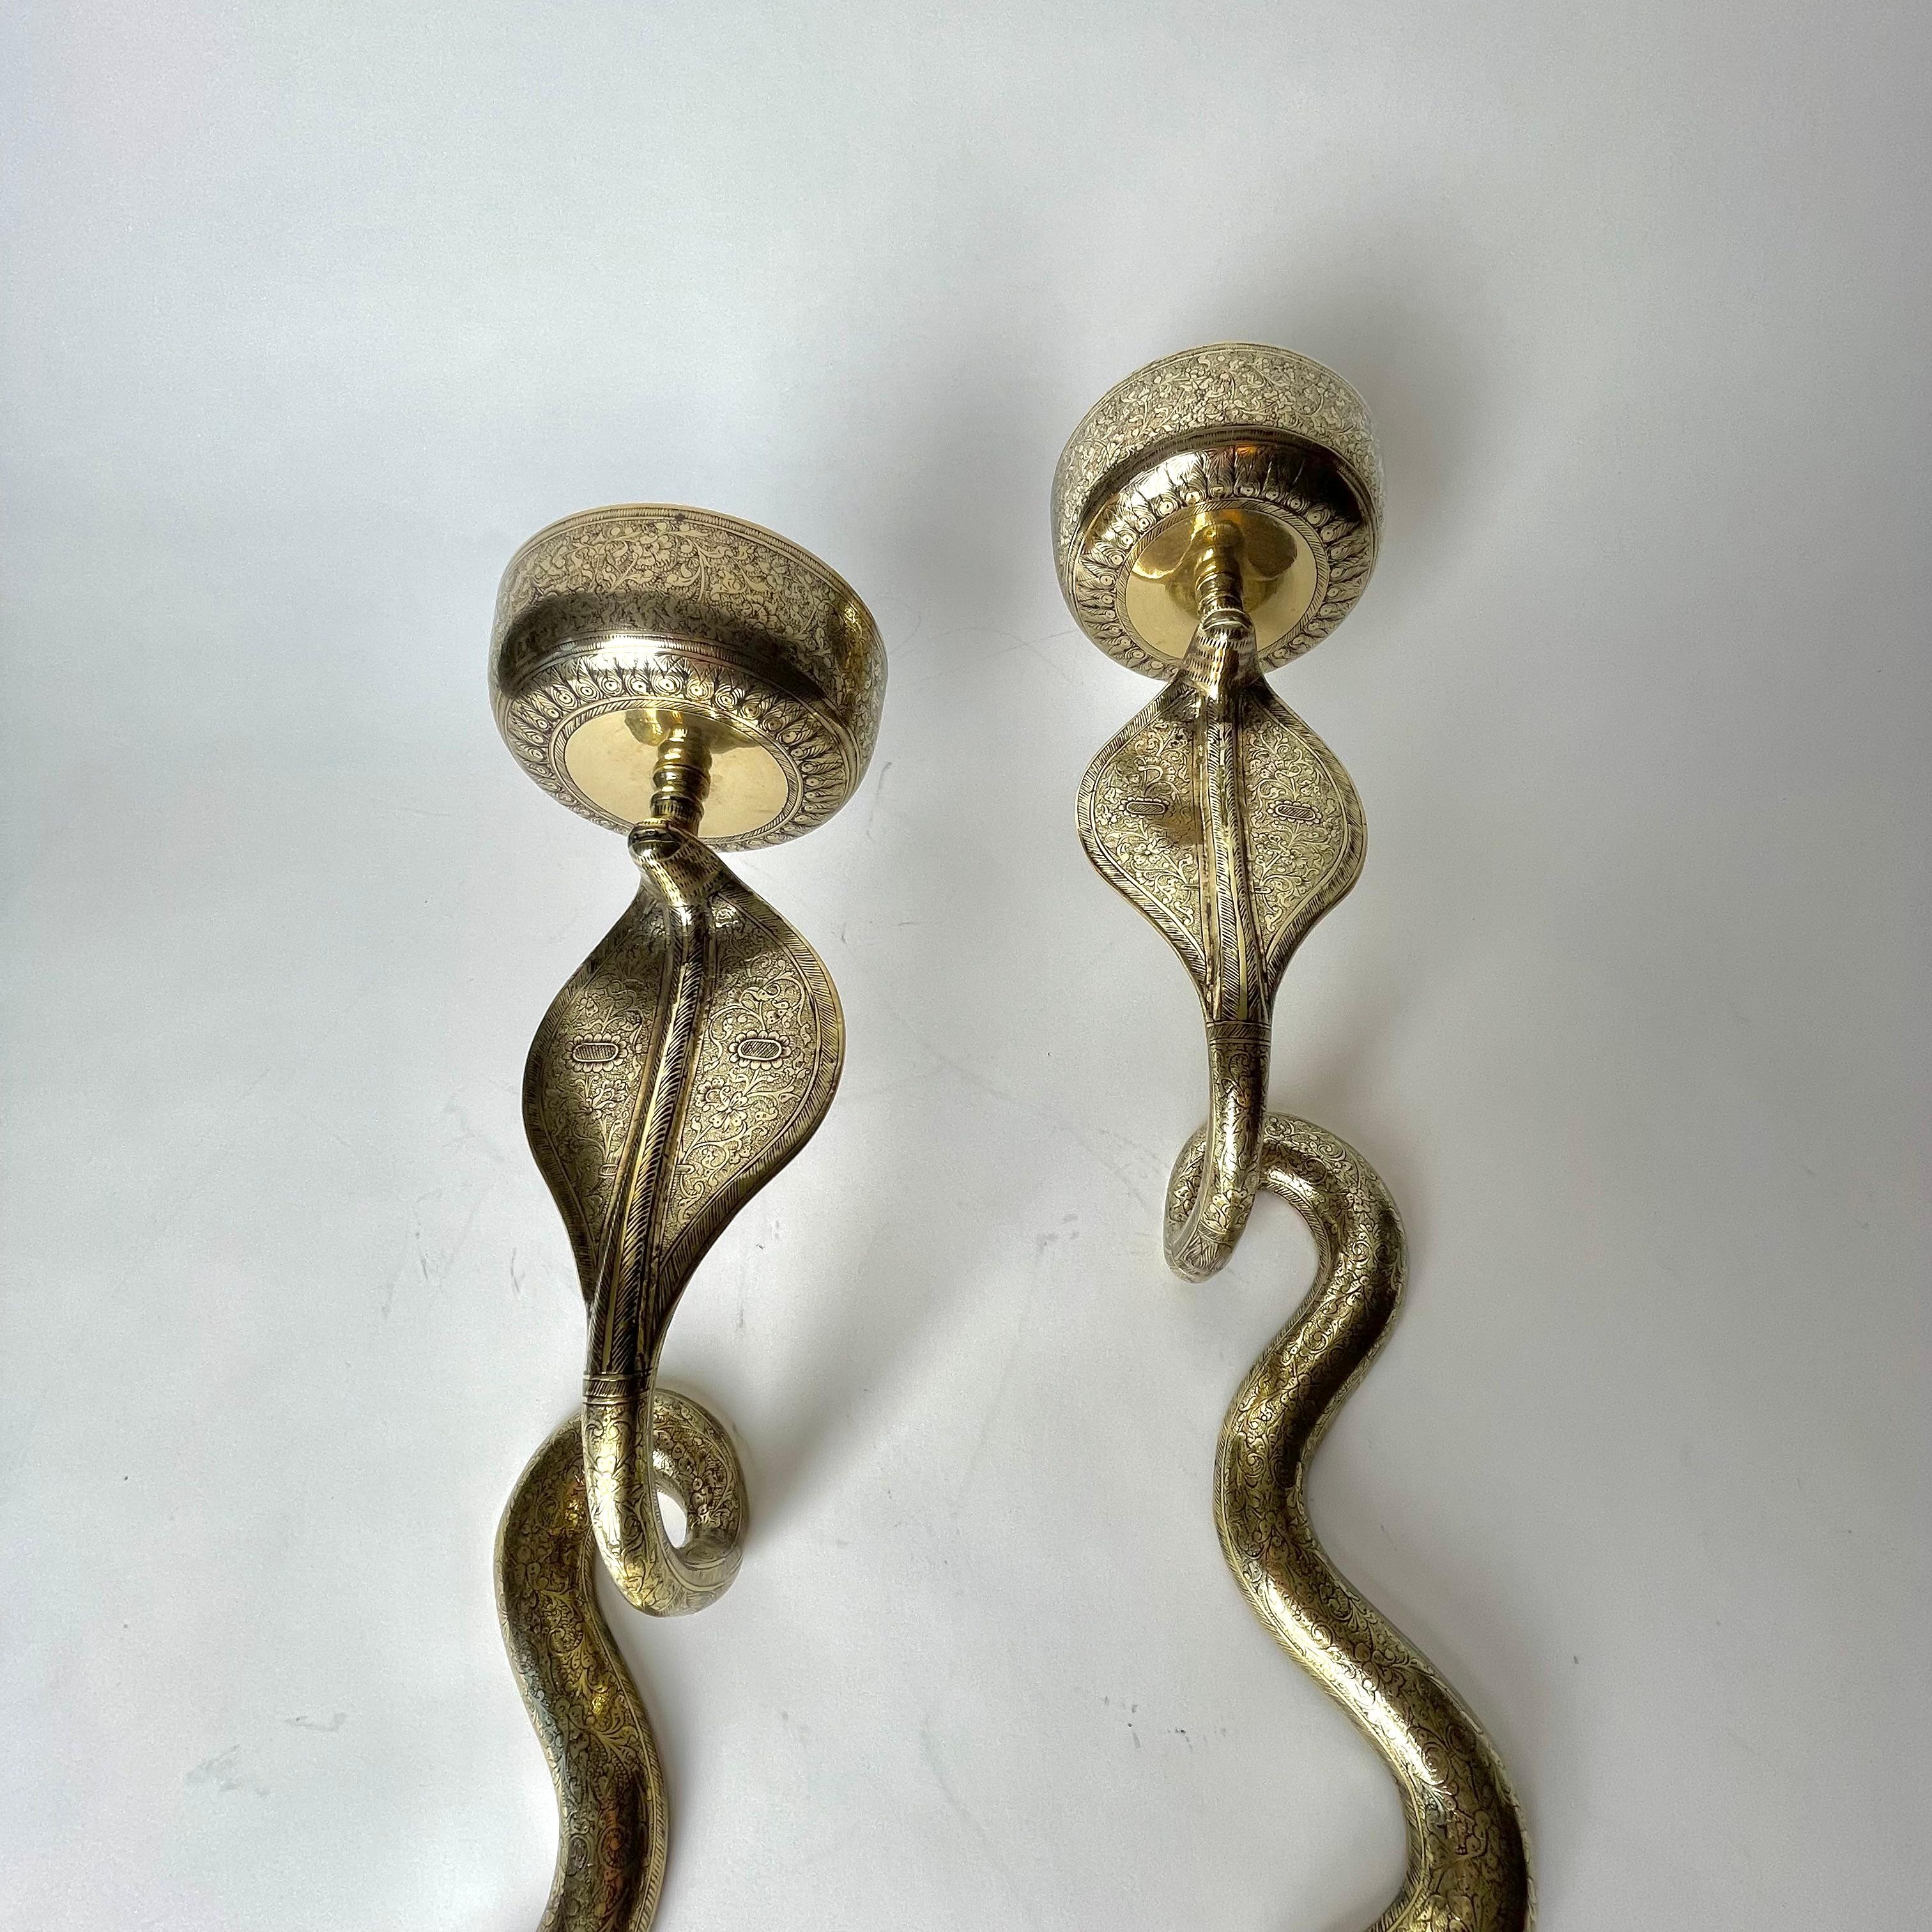 Asian Pair of Wall Lights  in the Shape of a Cobra, Art Deco, 1920s-1930s For Sale